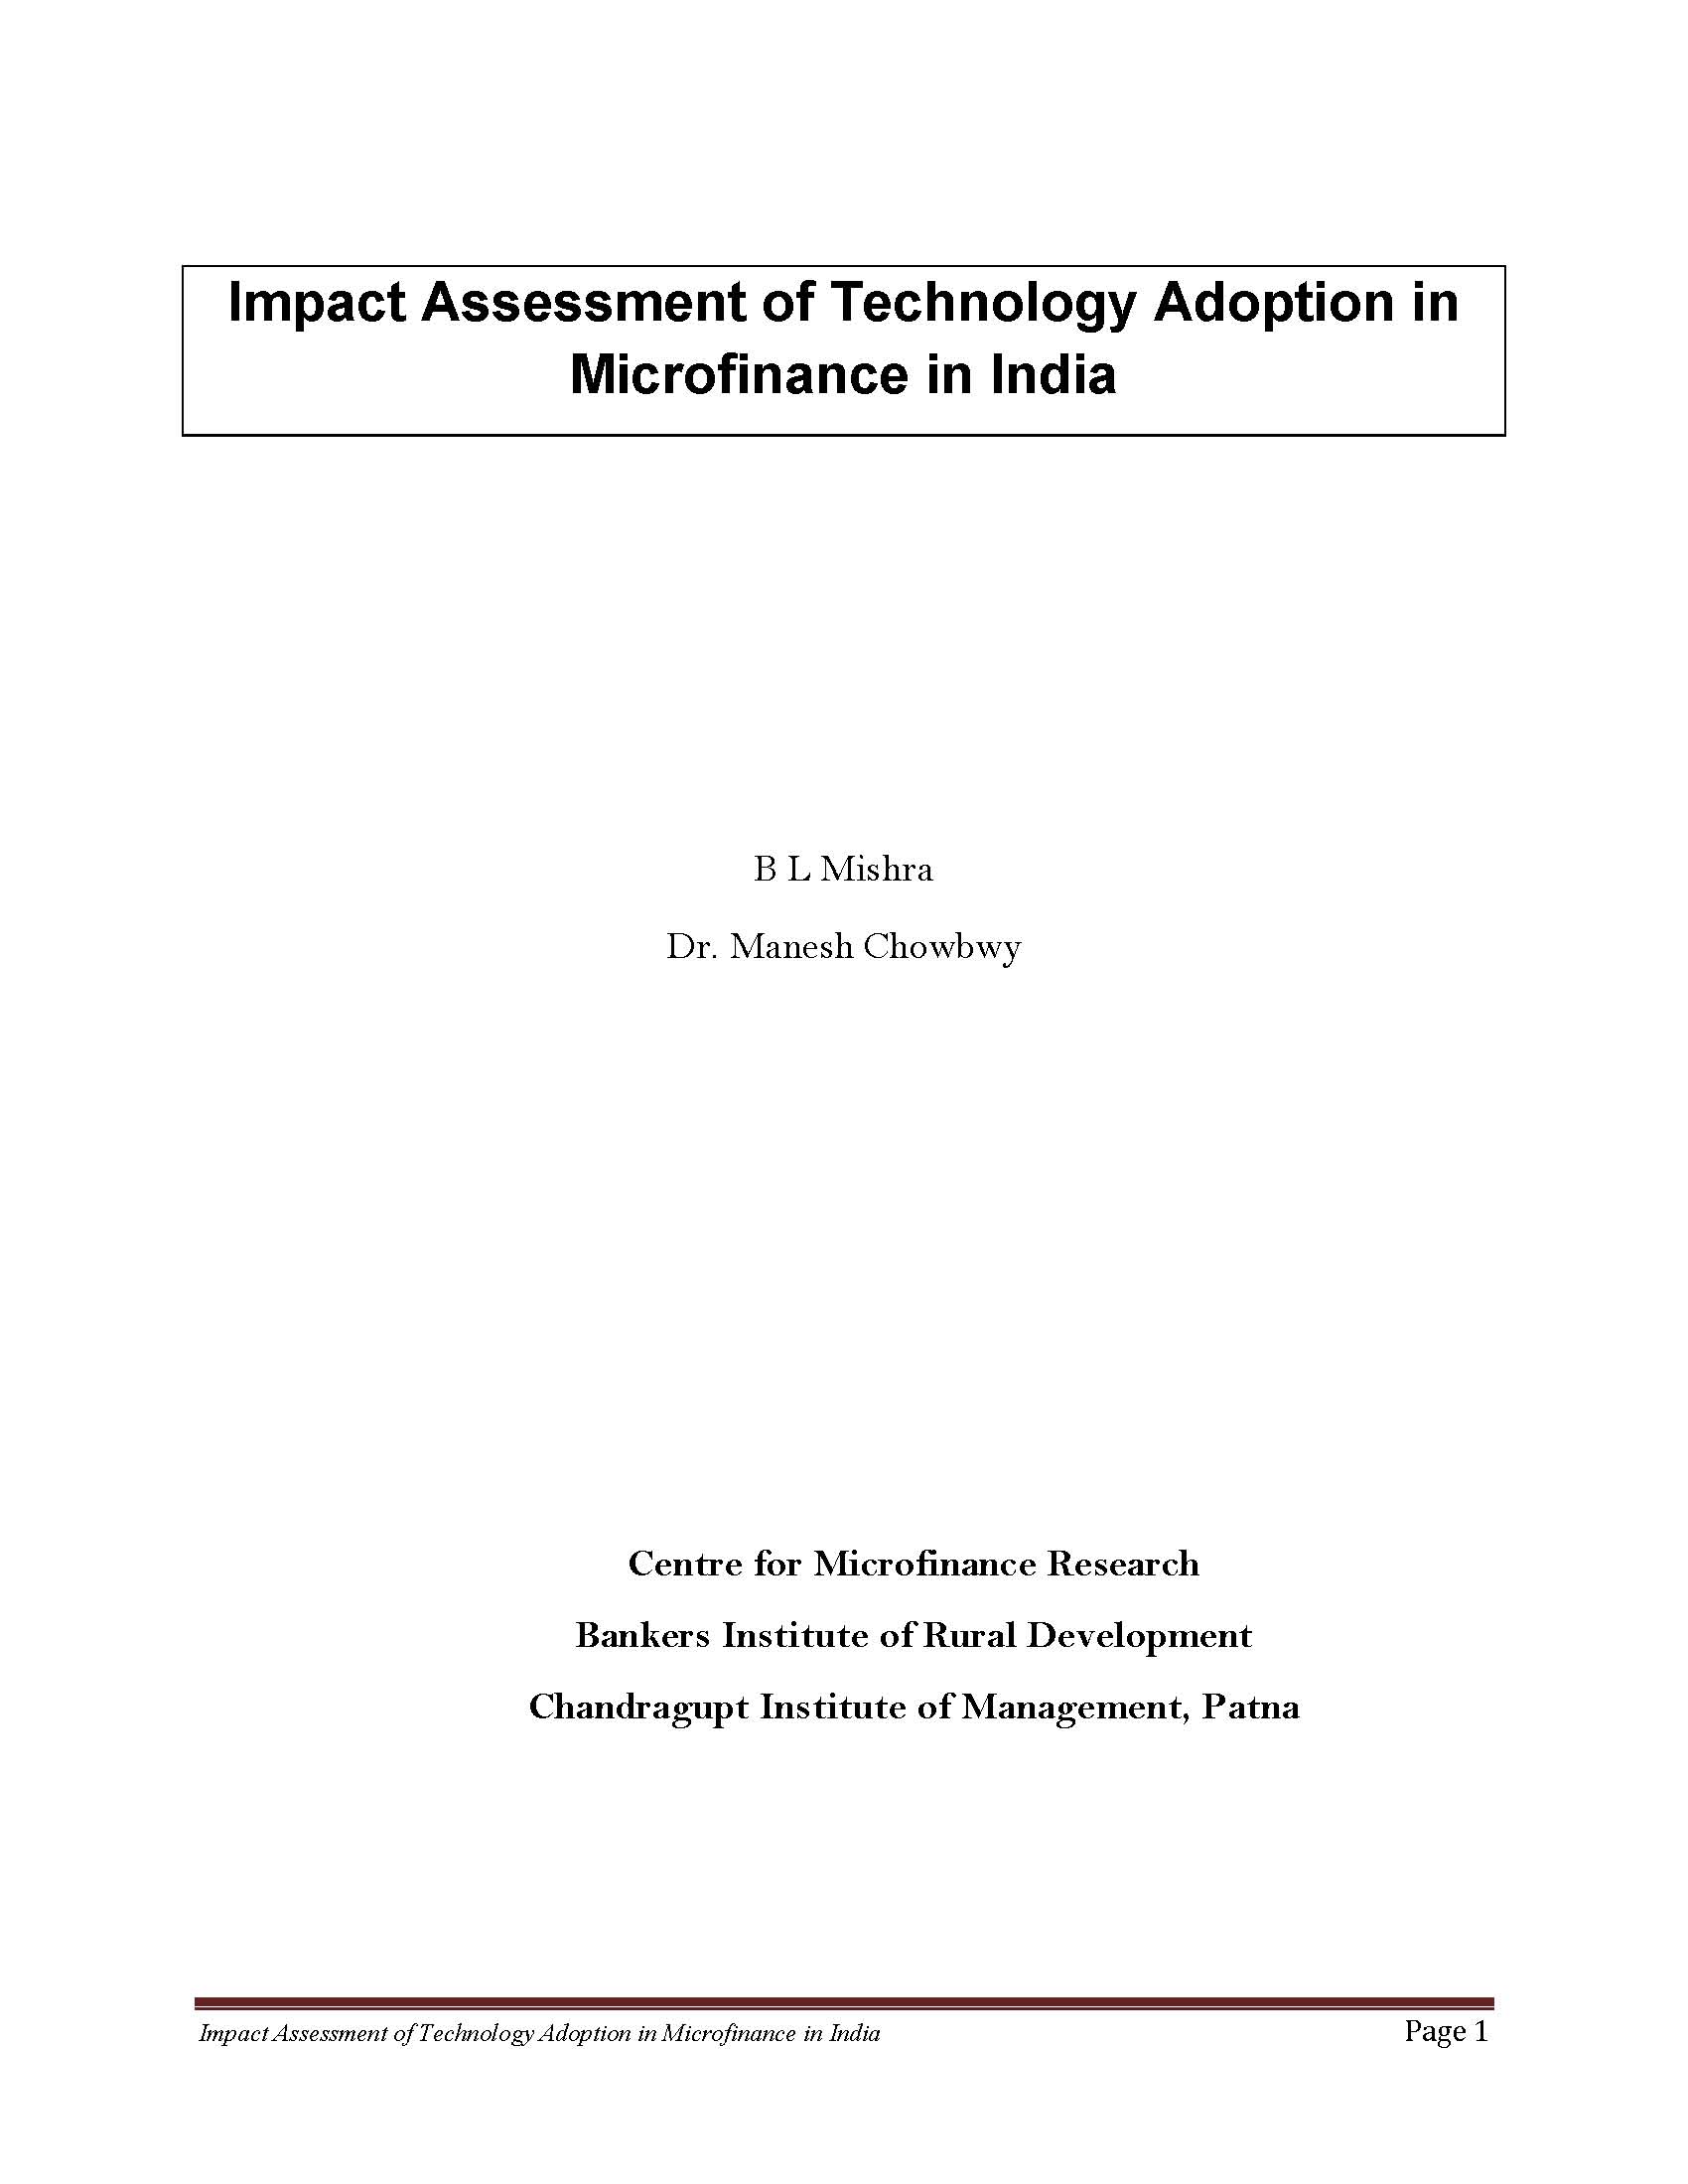 Impact Assessment of Technology Adoption in Microfinance in India